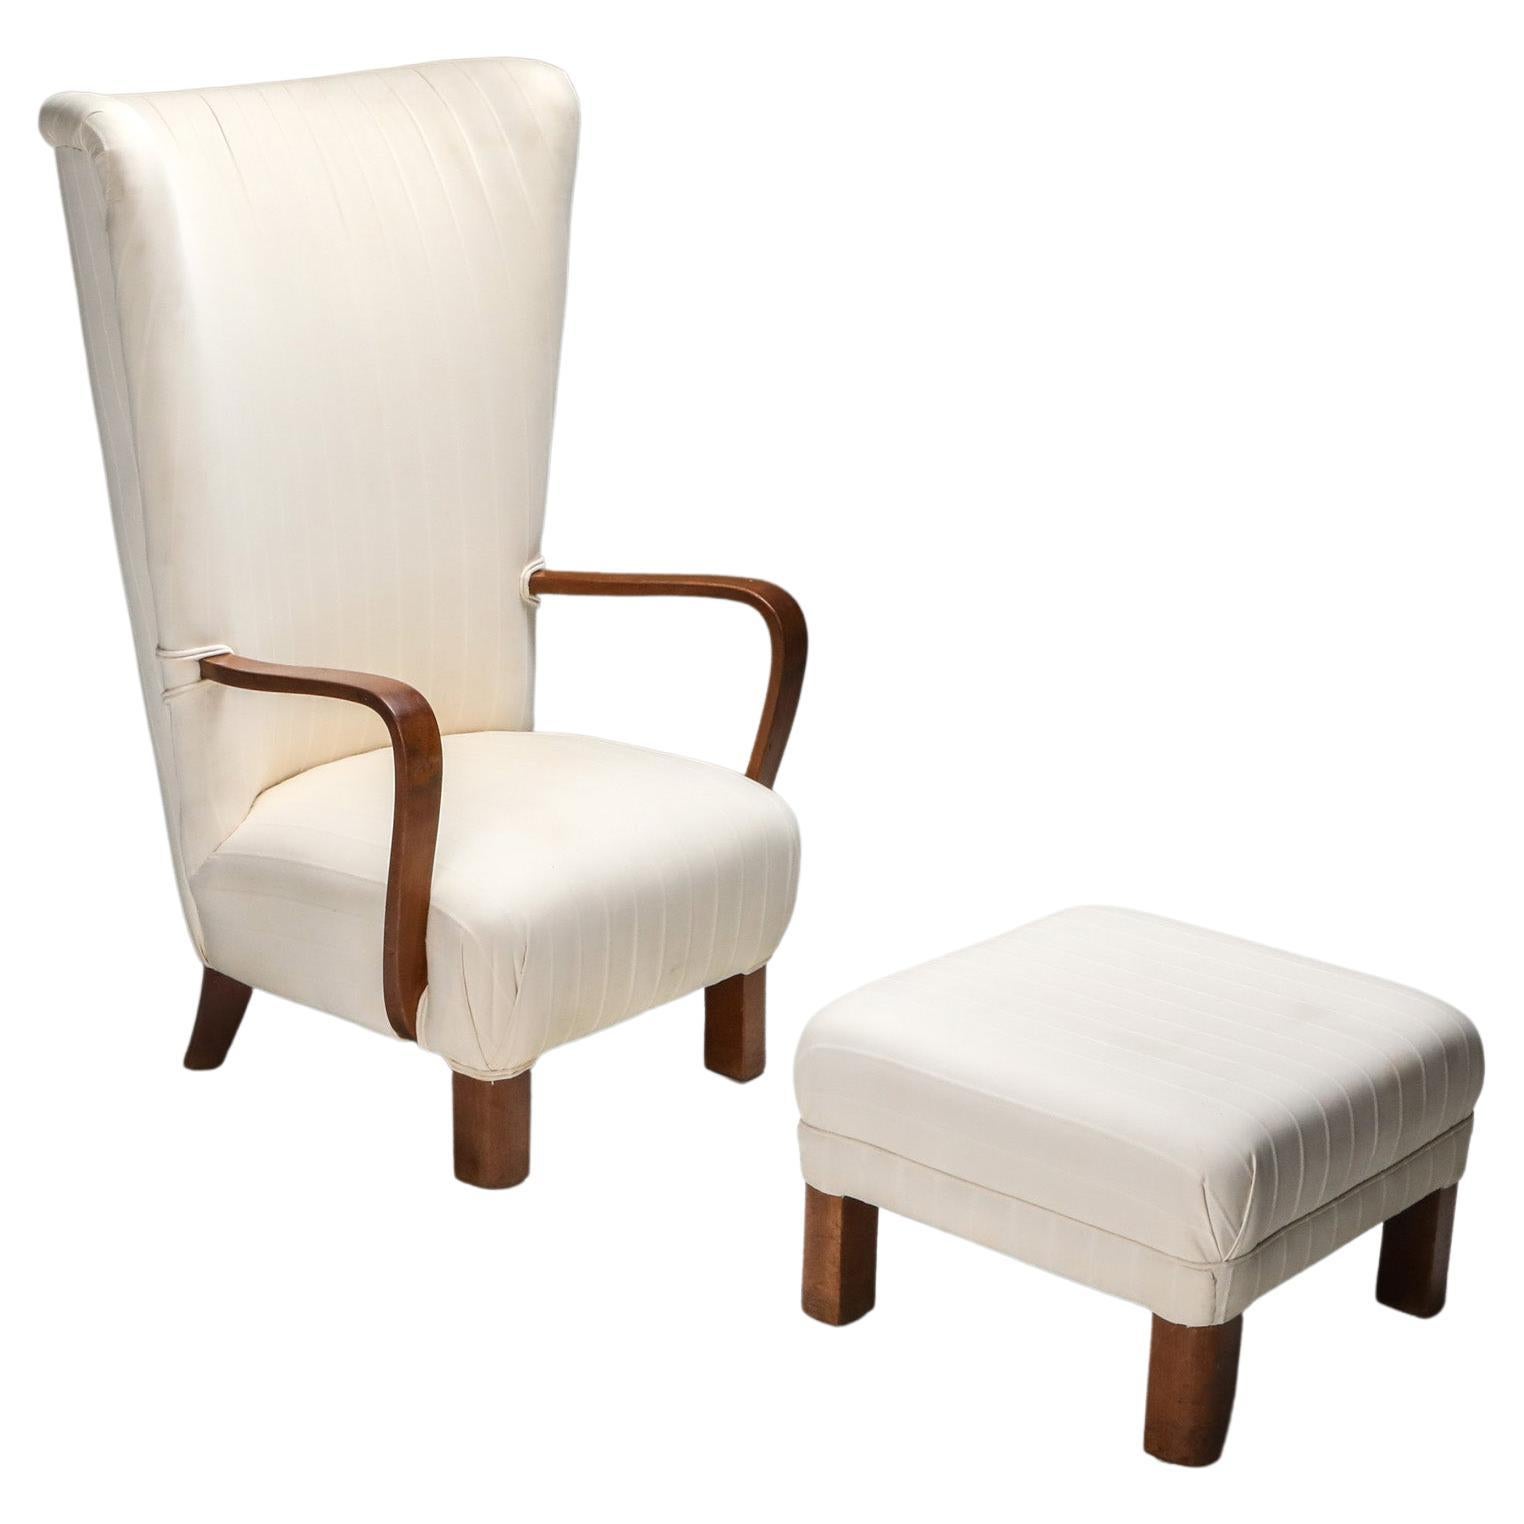 White Wingback Chair With Ottoman, Denmark, 1950s For Sale